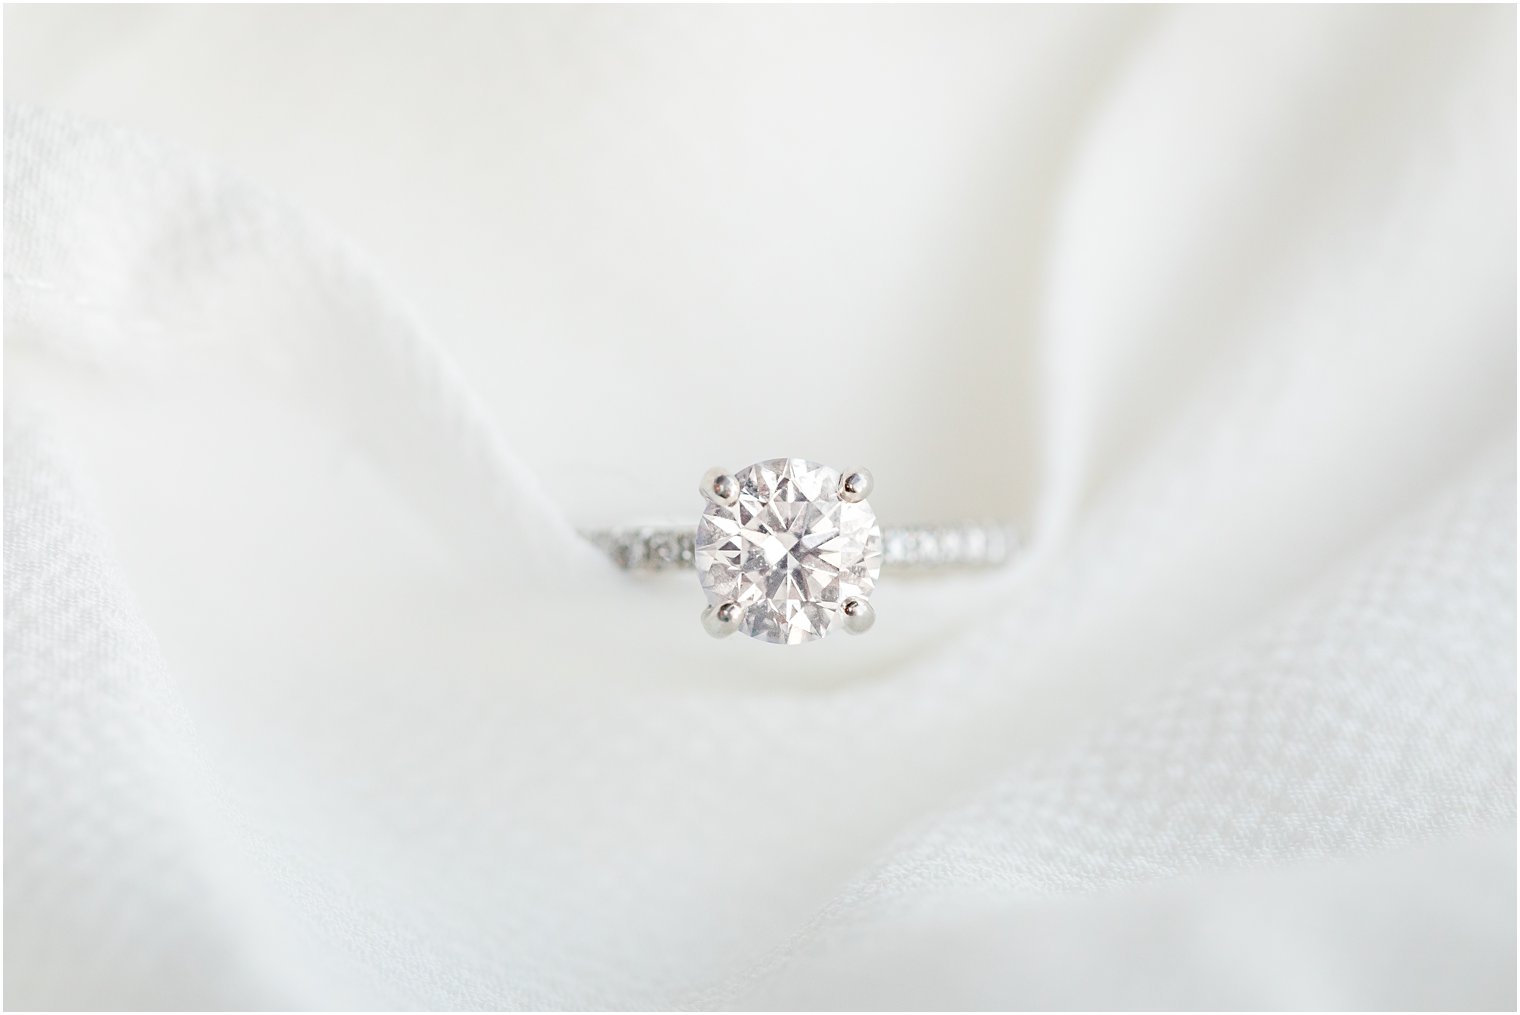 elegant and simple engagement ring photographed on white fabric